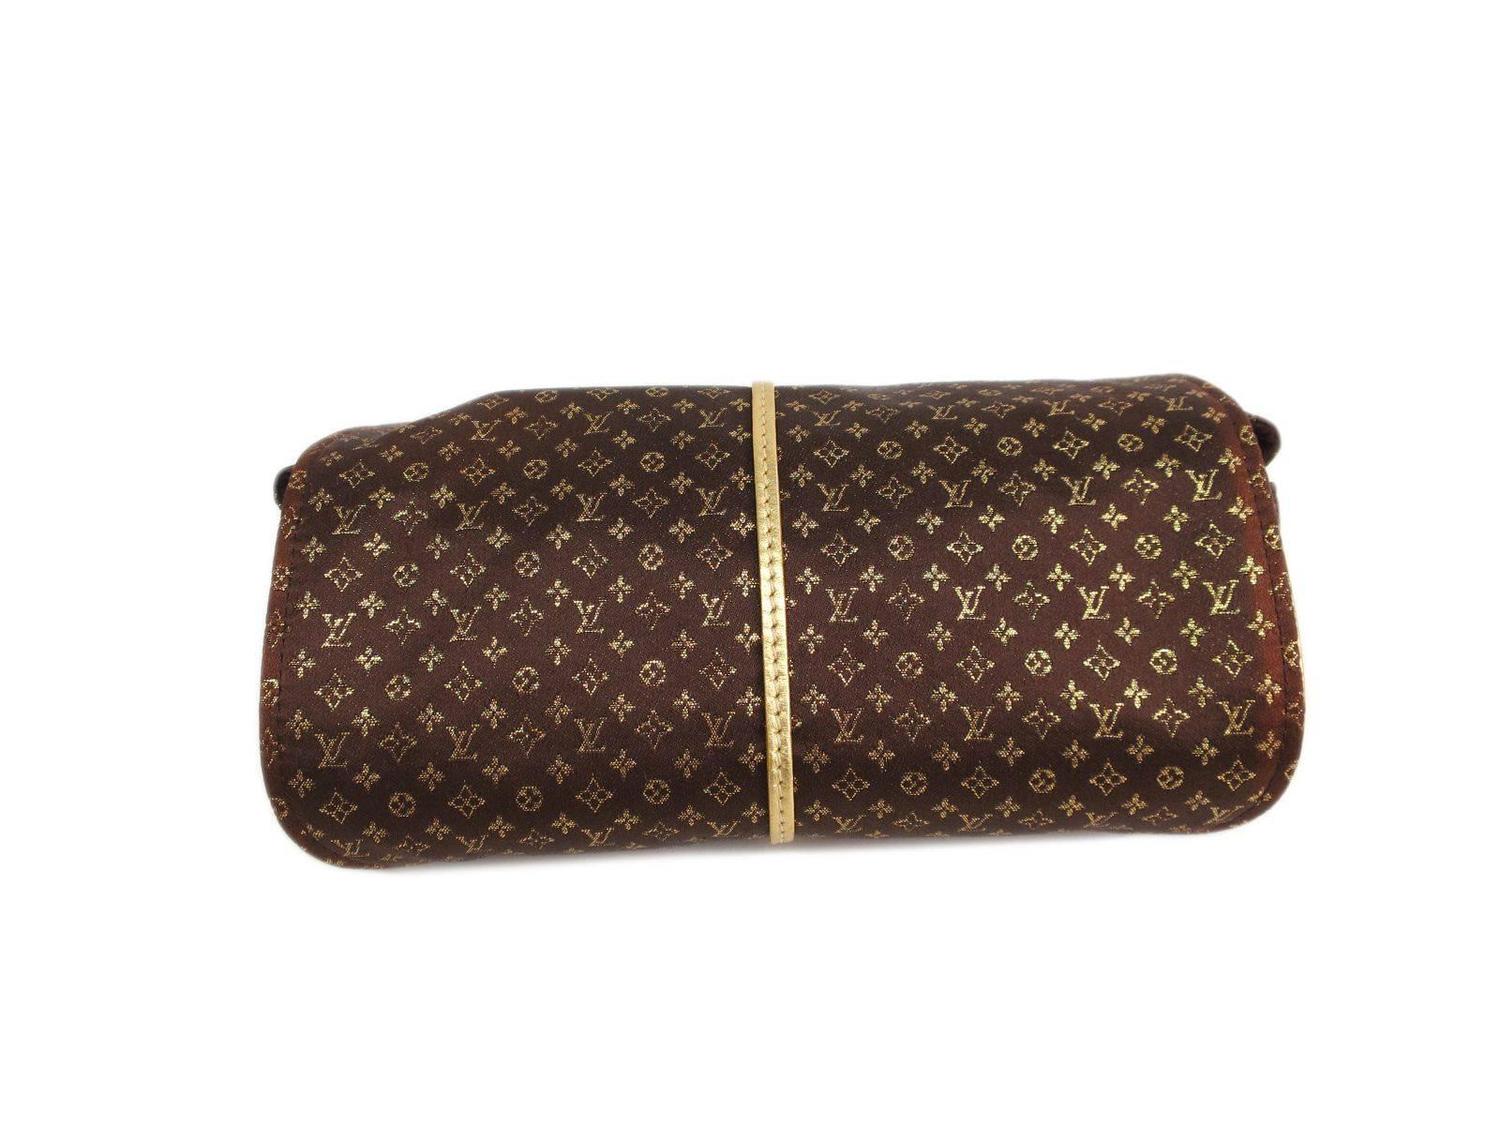 Louis Vuitton Monogram Logo Print Roll Up Jewelry Accessory Travel Case Bag at 1stdibs